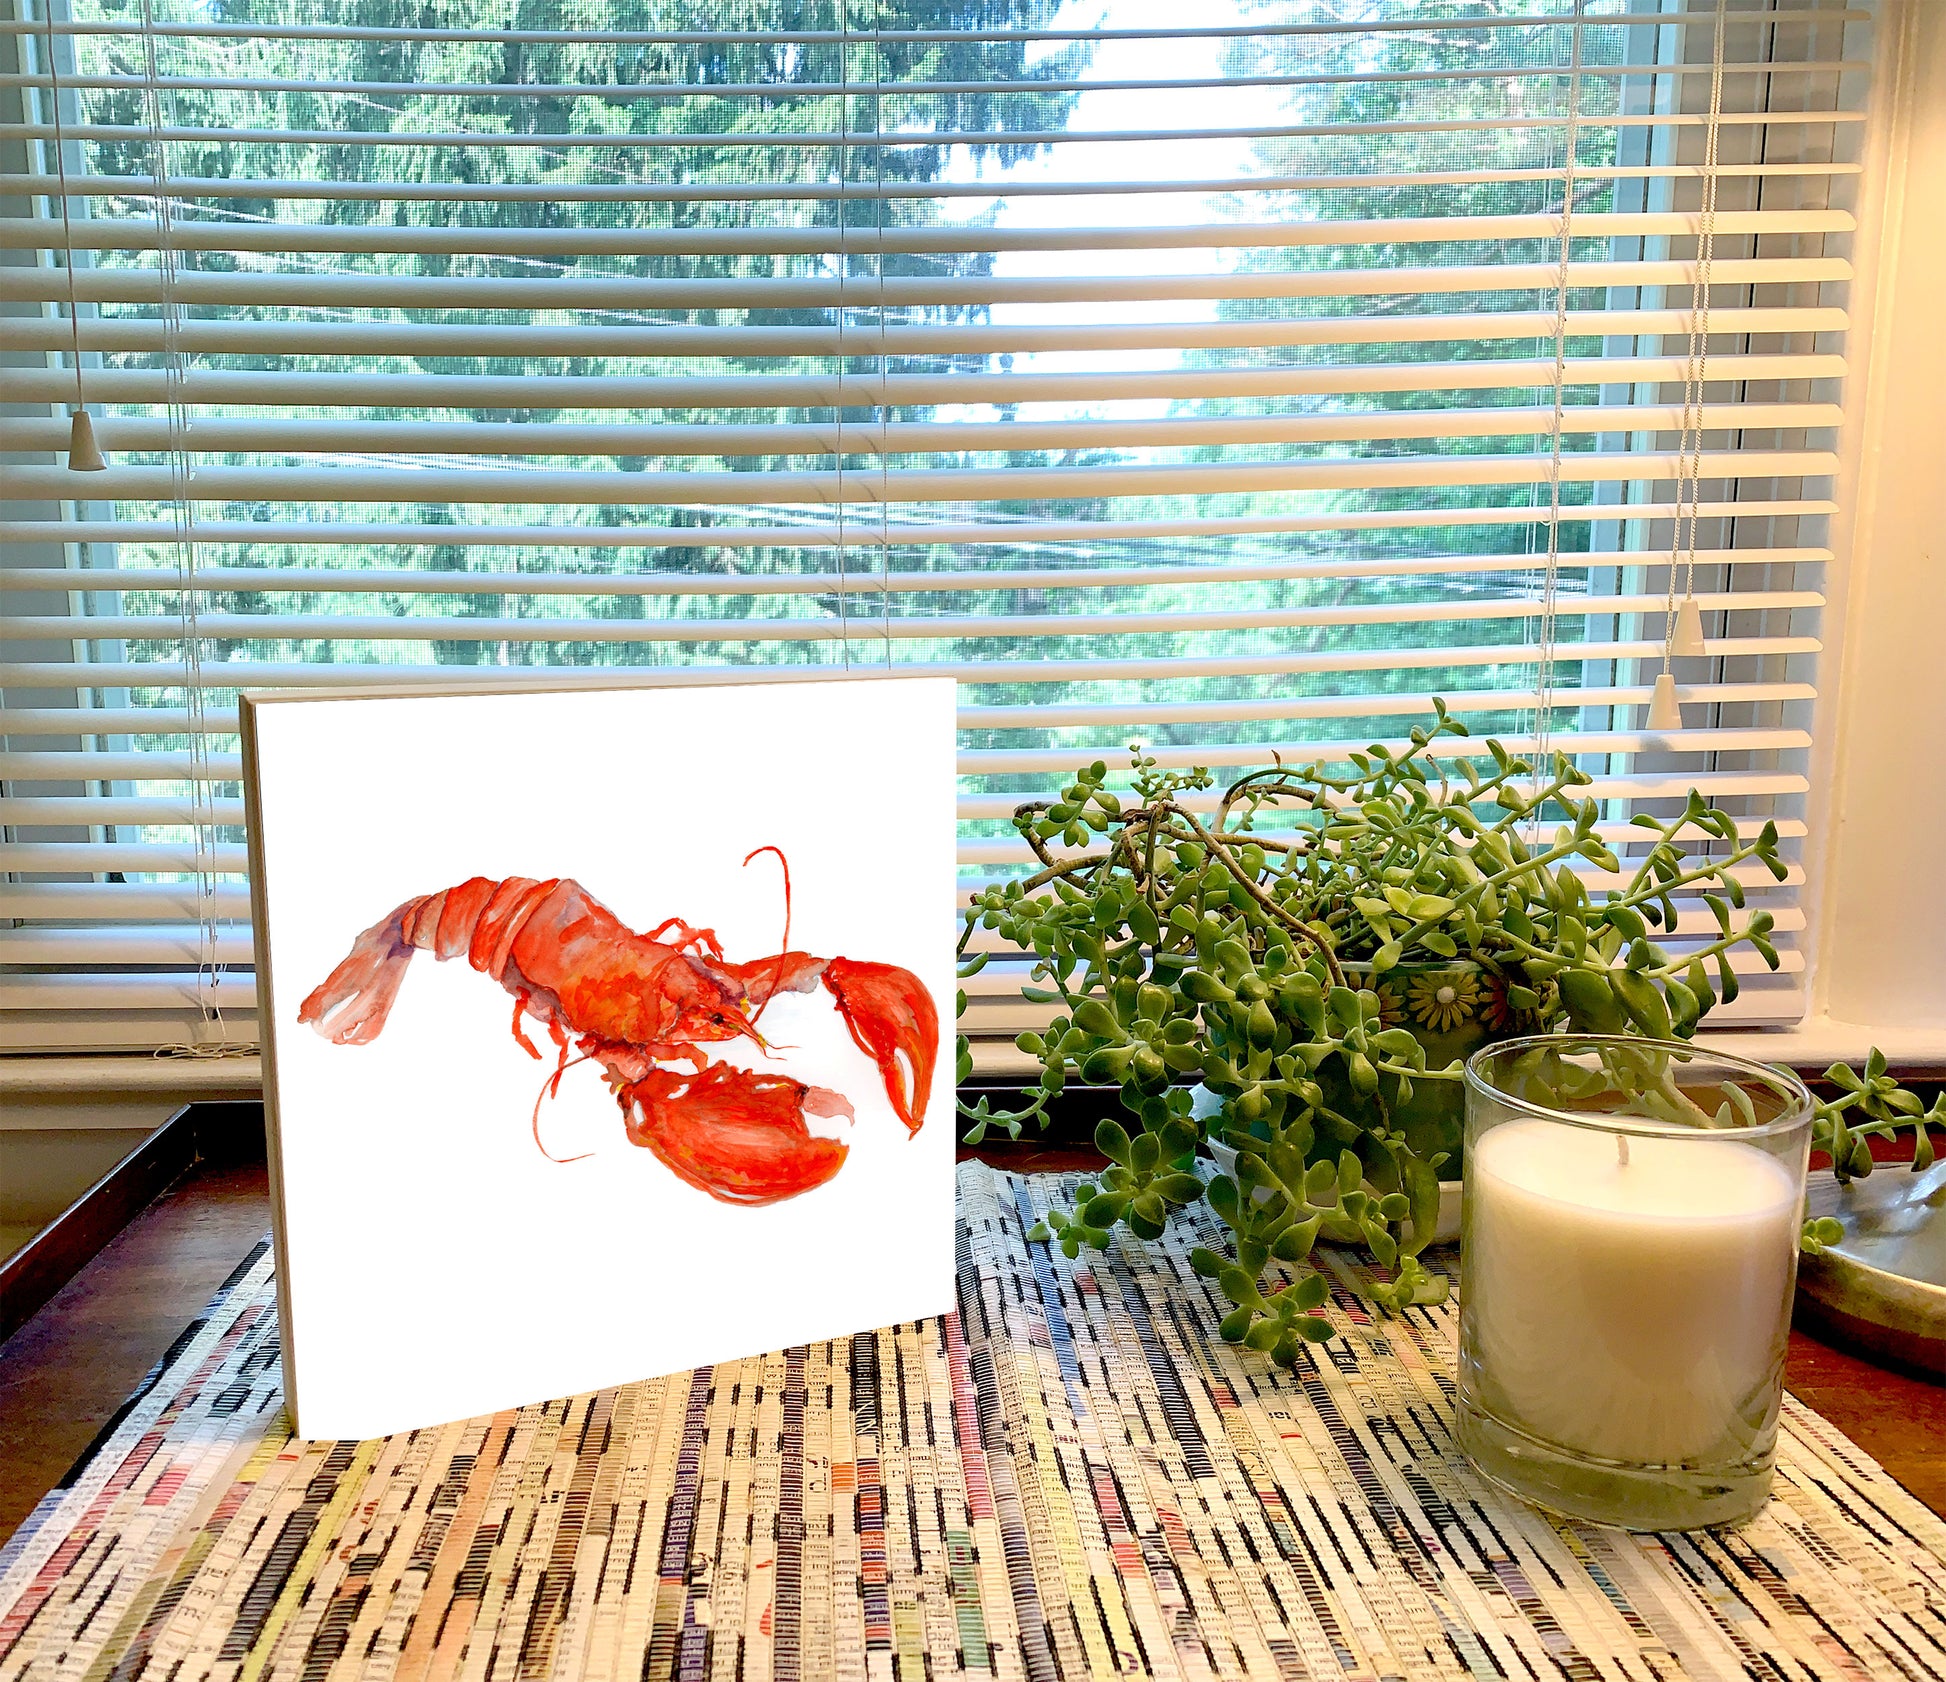 Lobster Watercolor Print on Wood Block - Flamingo Shores - Original Art for Home Decor and Gifts